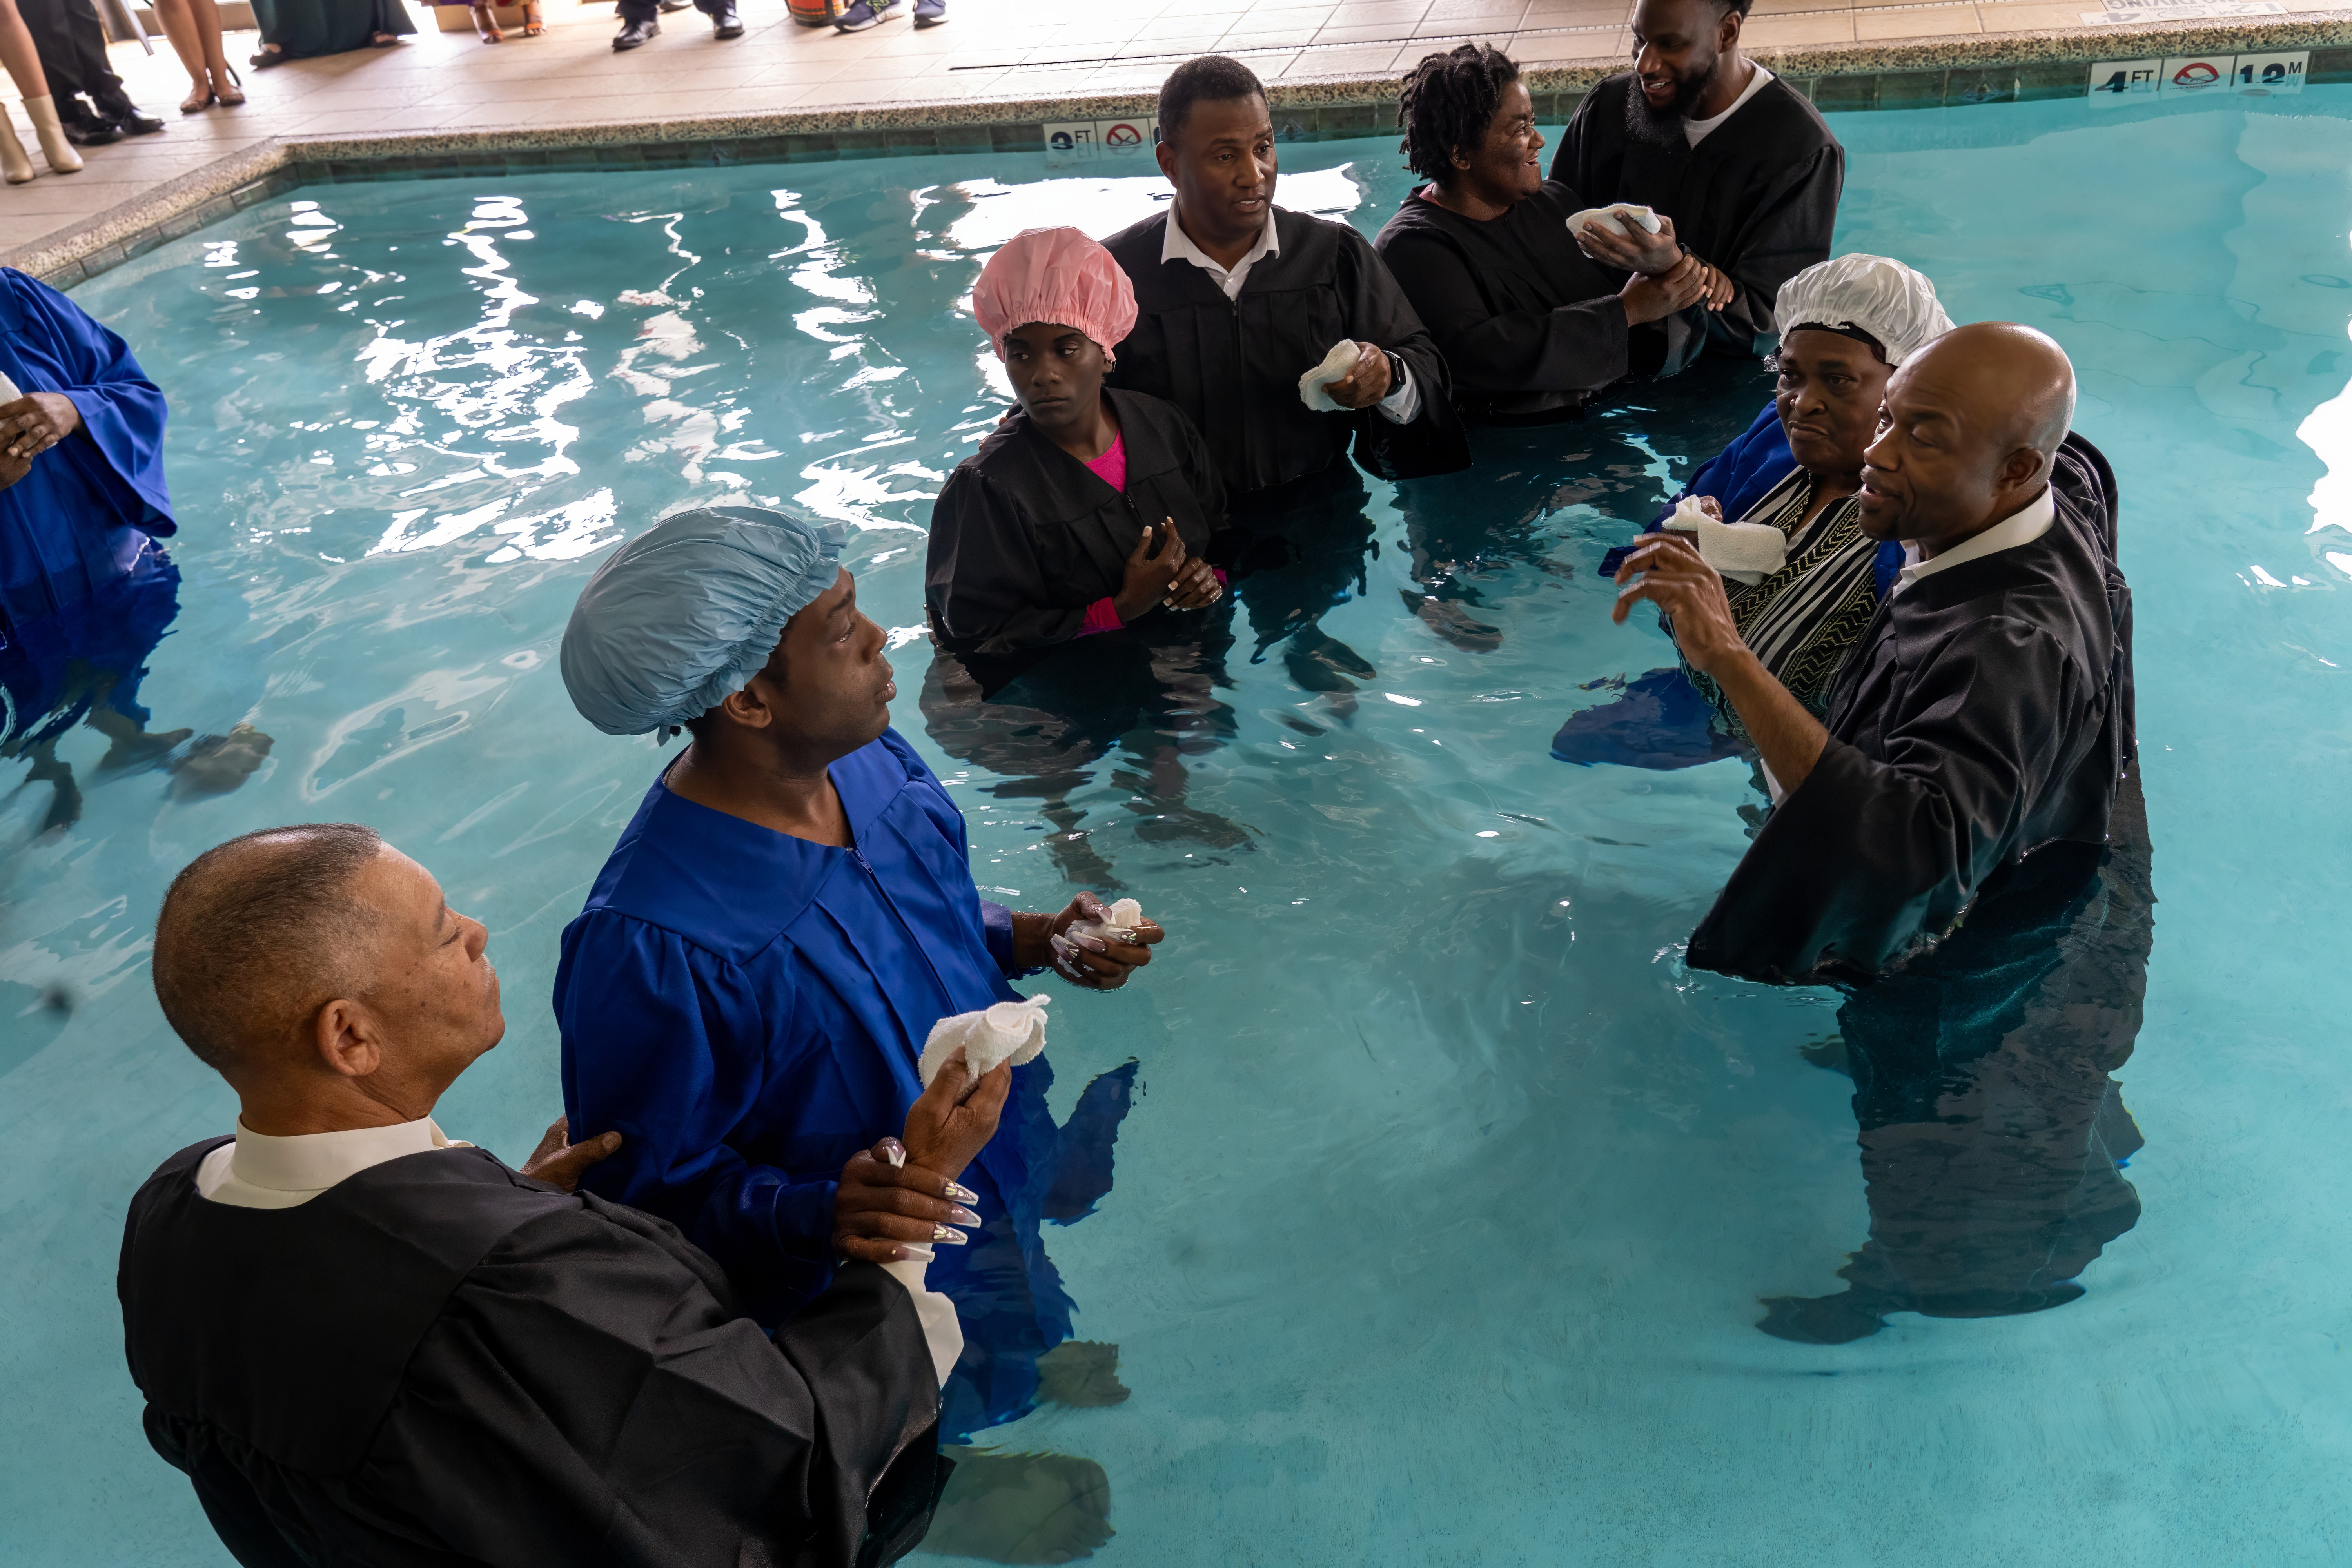 Several people getting baptized